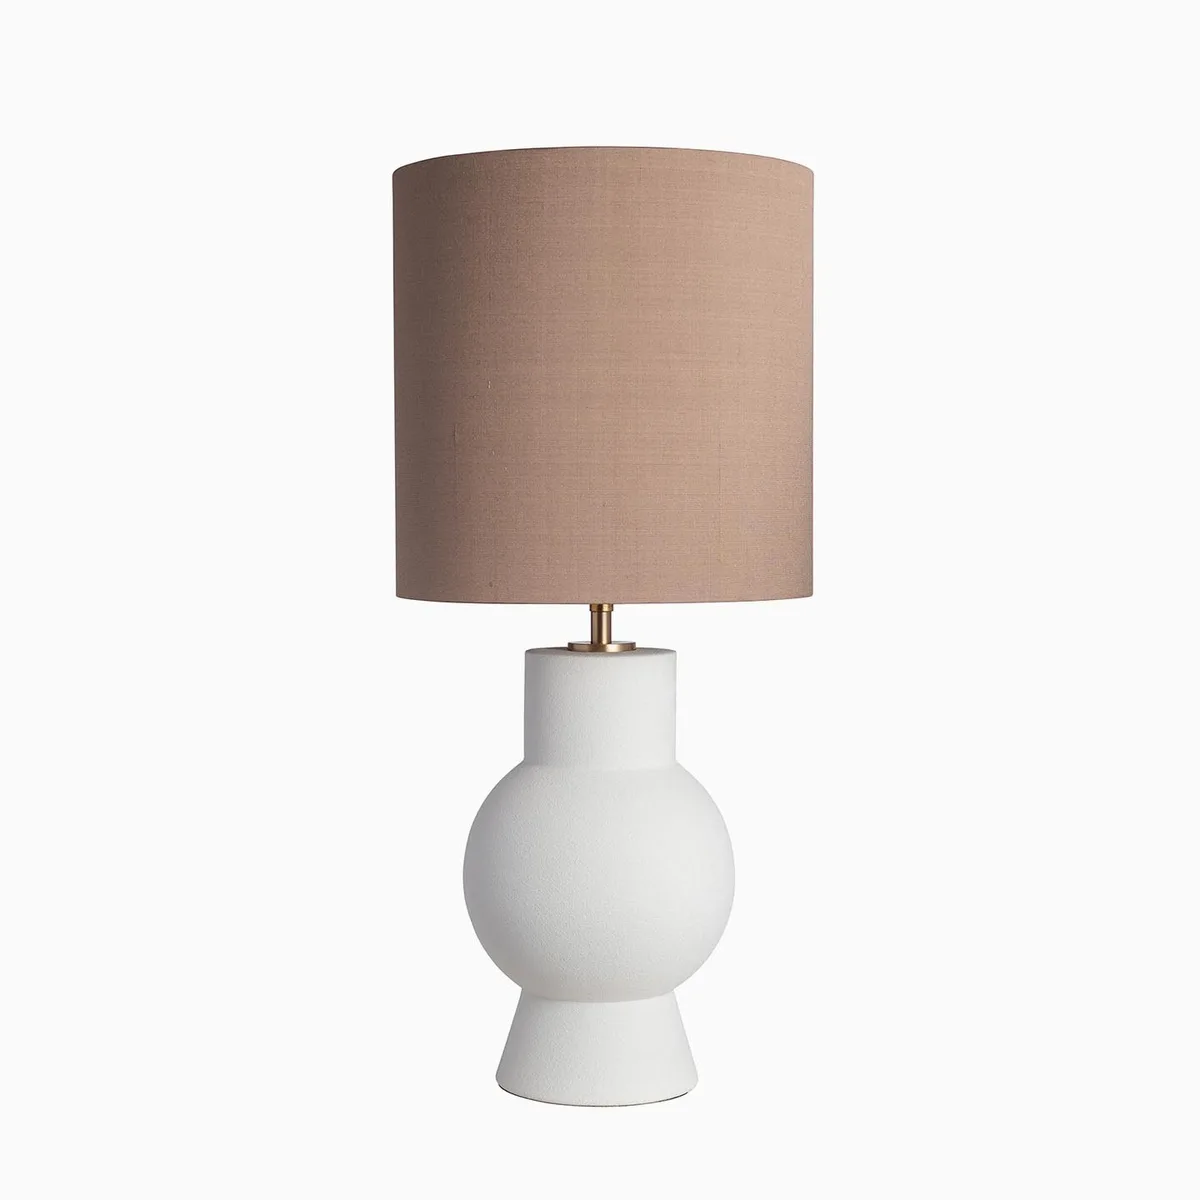 Aster table lamp white